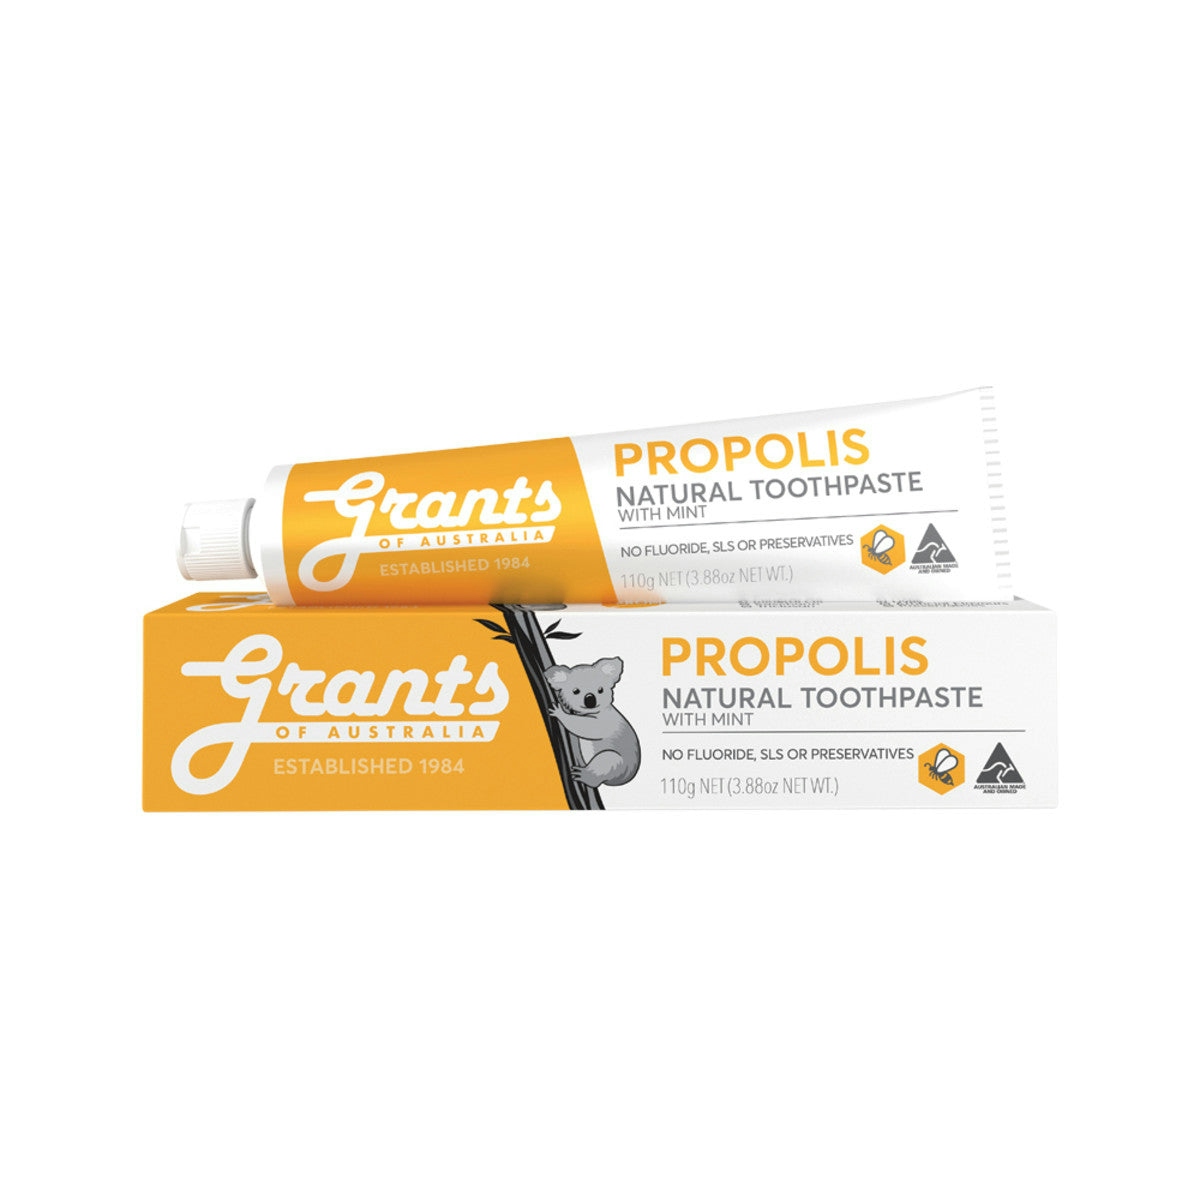 image of Grants Of Australia Natural Toothpaste Propolis with Mint 110g on white background